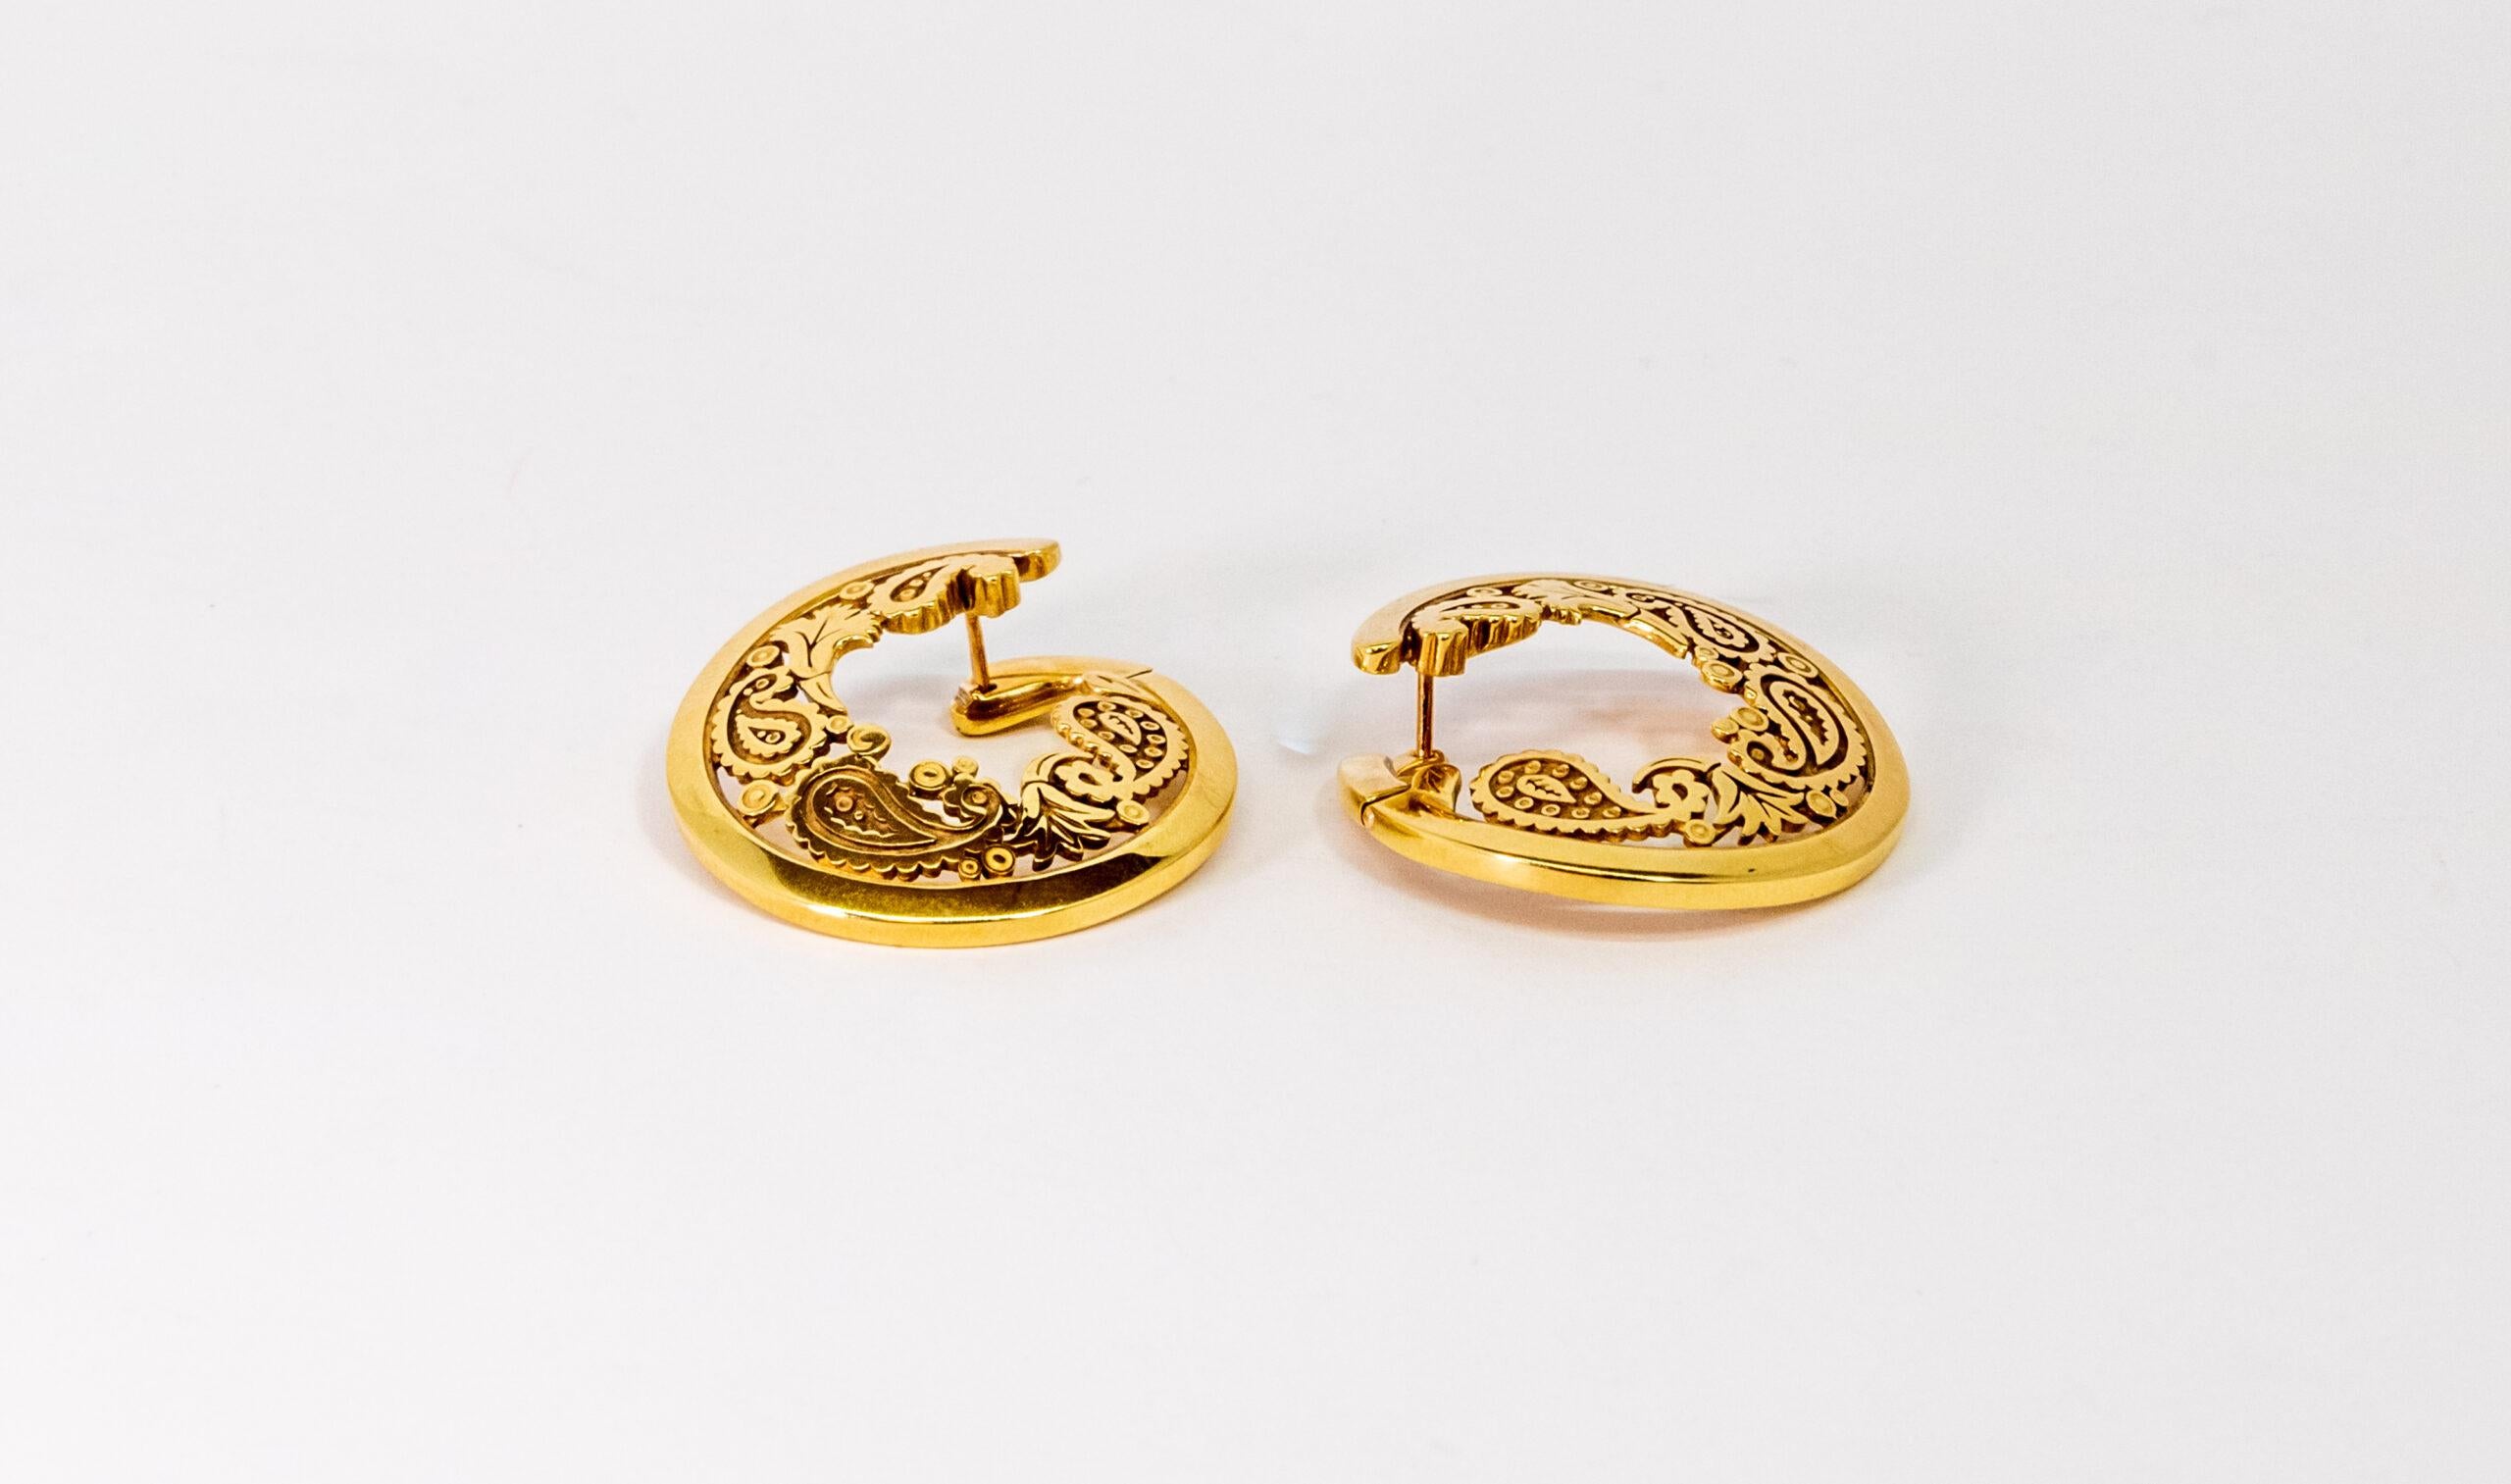 This 18K Yellow Gold hoop earring. Hoops decorated with floral patterns. Latch back.

Dimensions: 3.3 cm x 3.3 cm